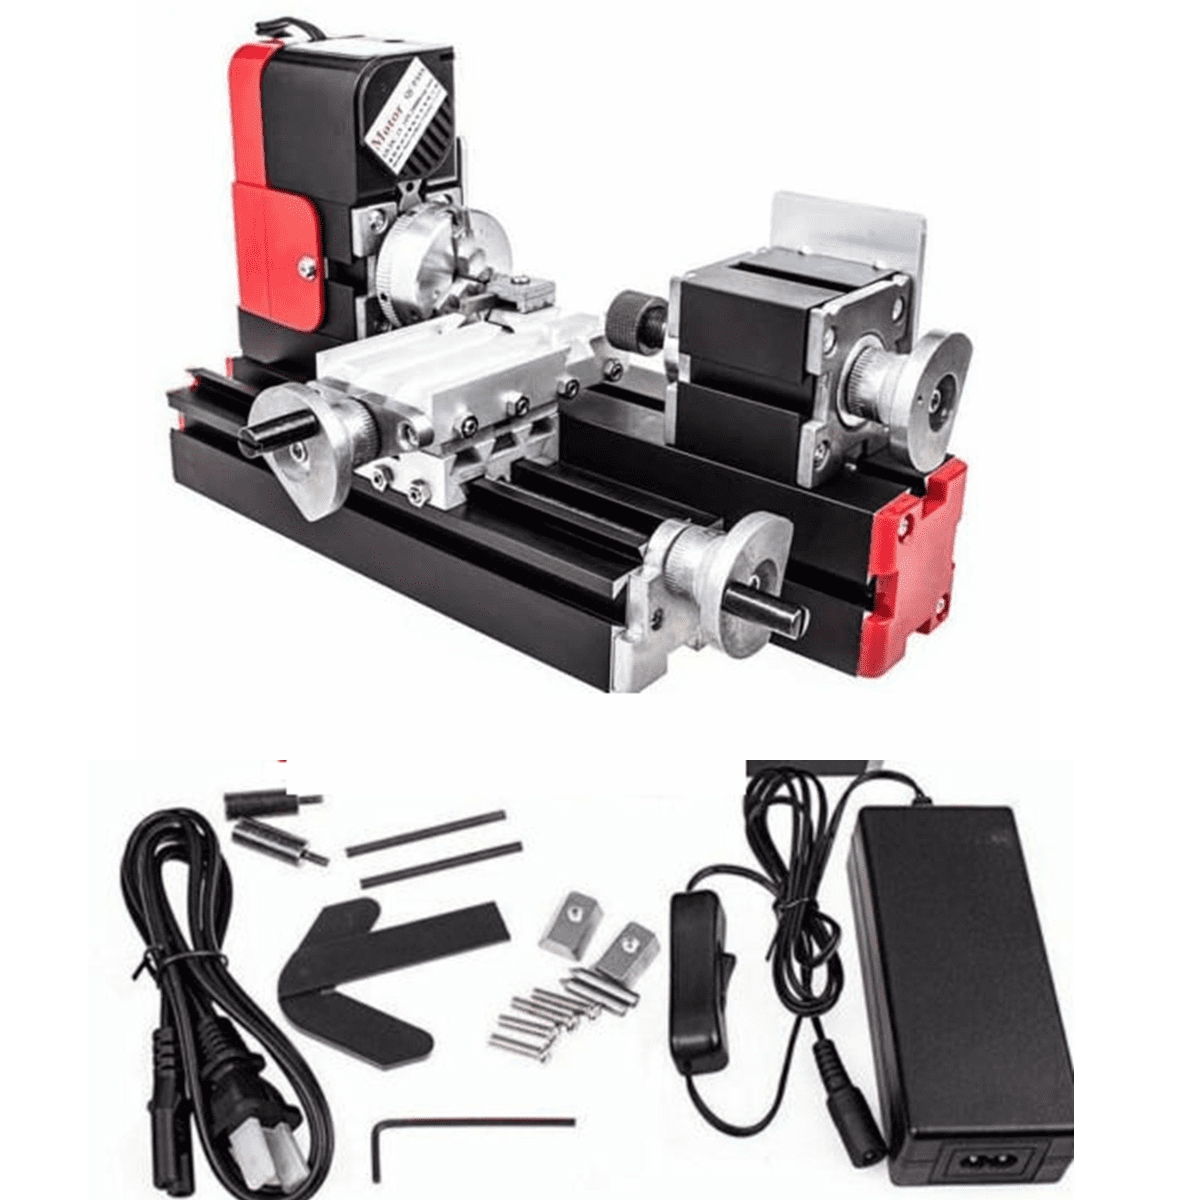 Details about   Aluminum Metal Mini Drilling Machine DIY Woodworking Tools Student Modelmaking 